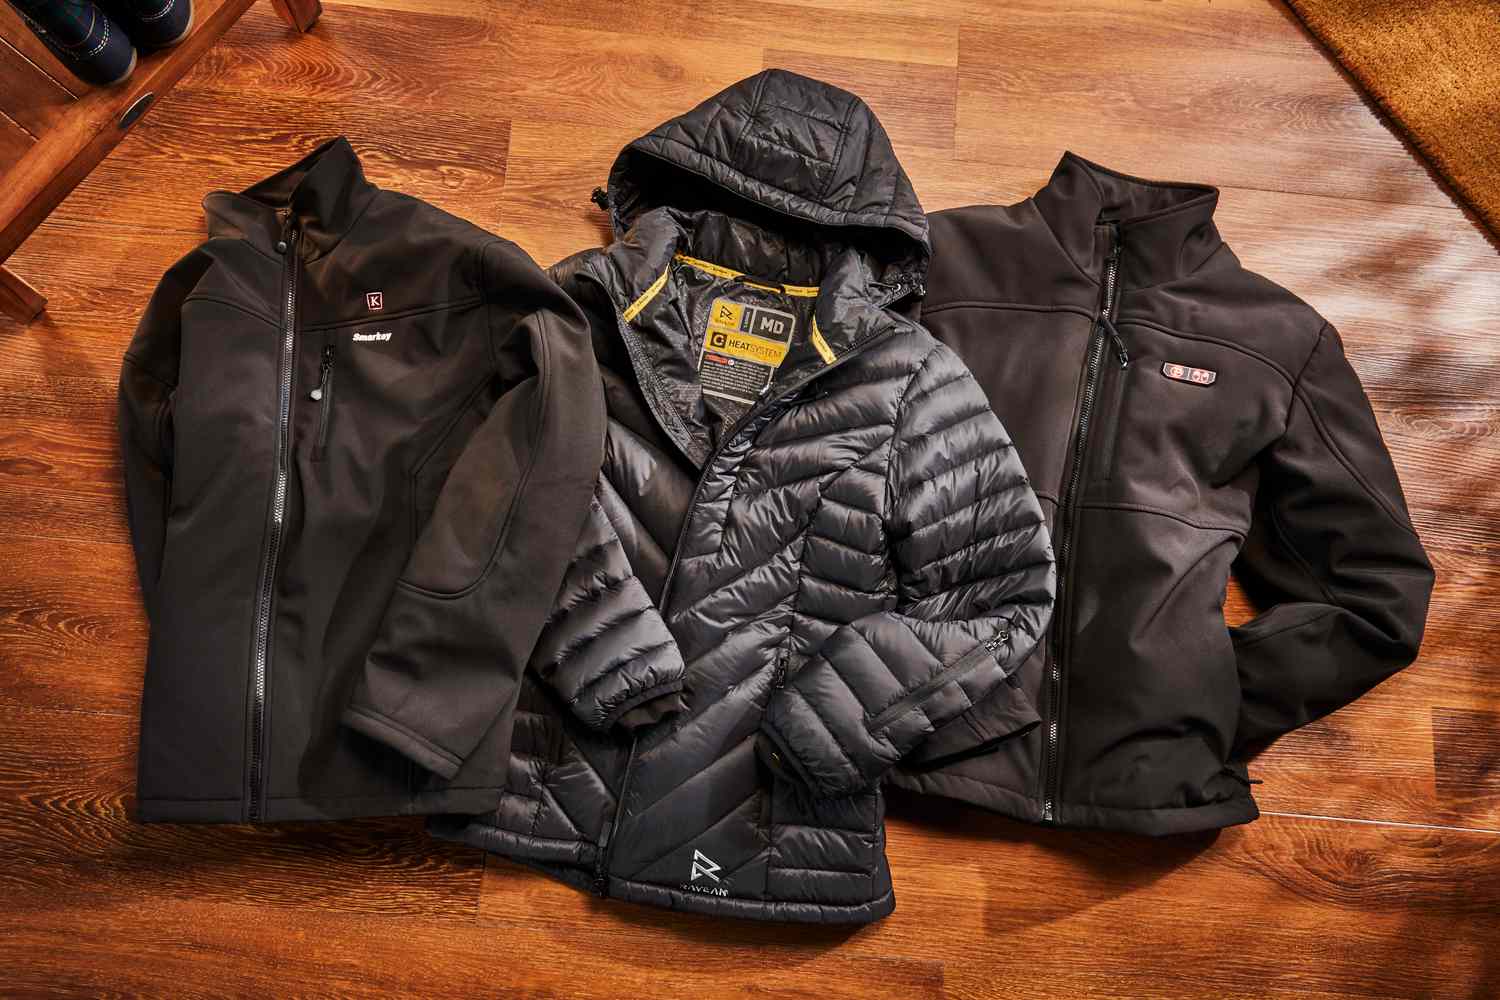 Ravean X Heated Jacket Review  Stay Toasty In Cold Climates